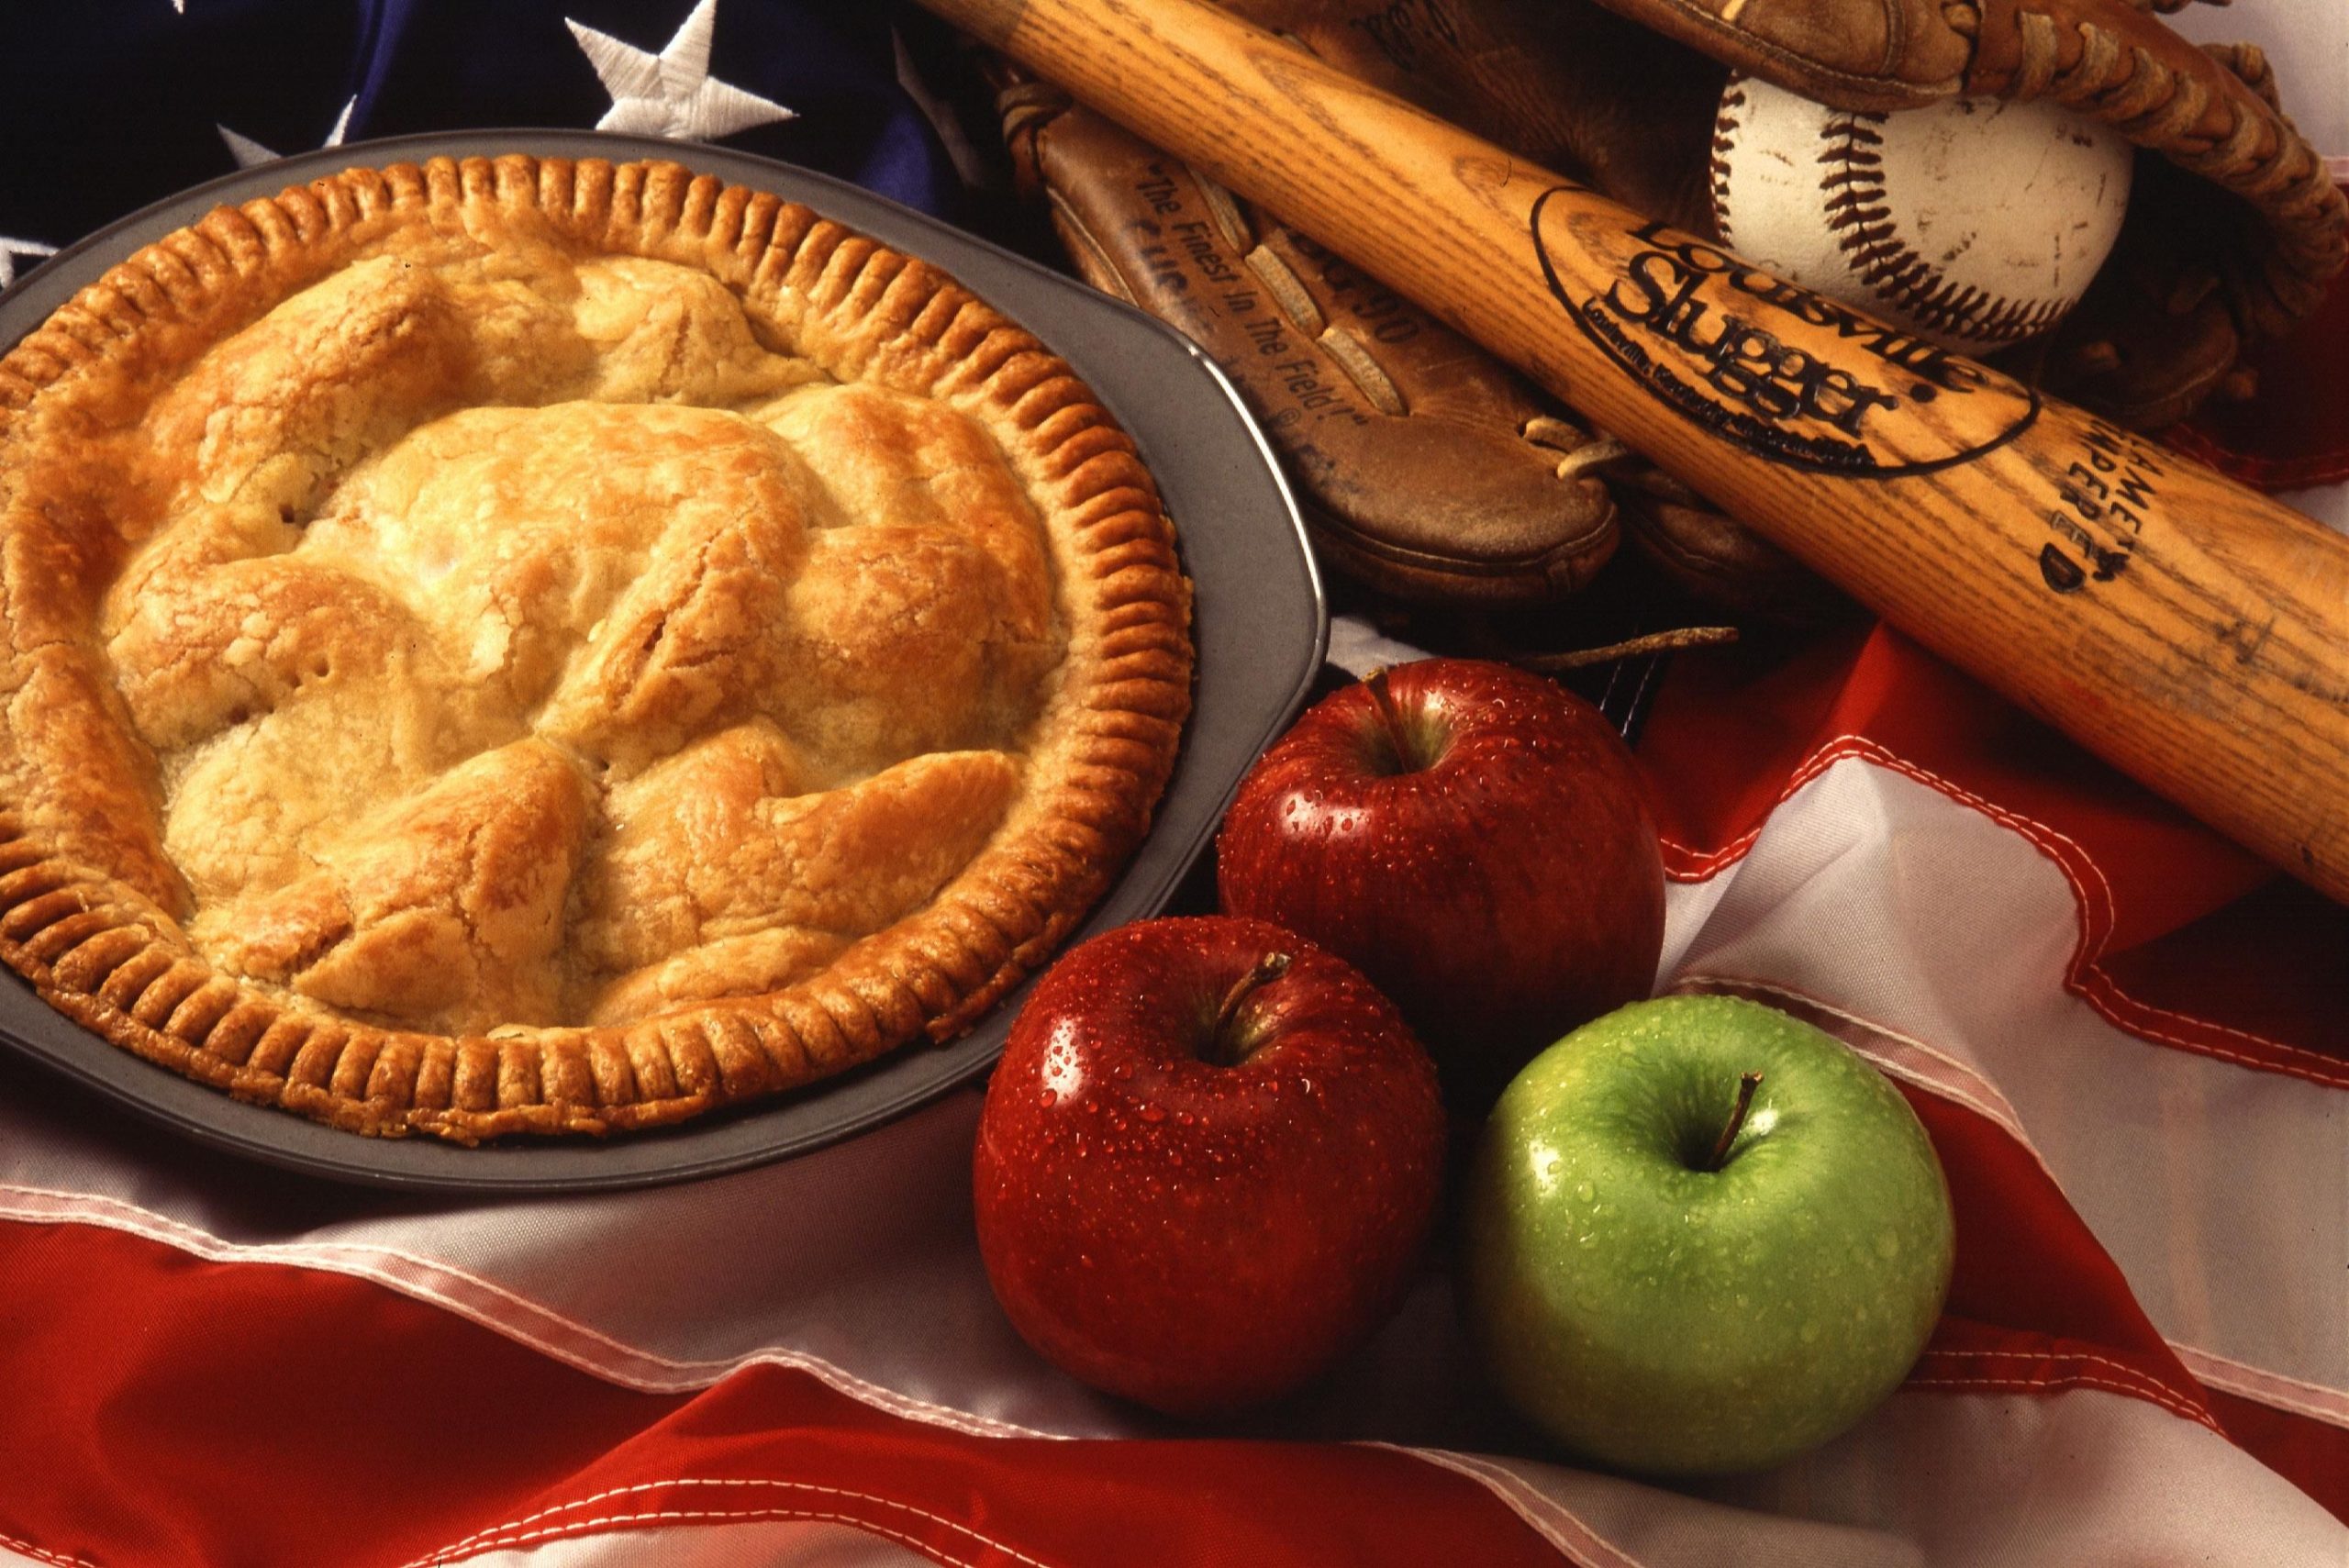 Today, apple pie is an American classic